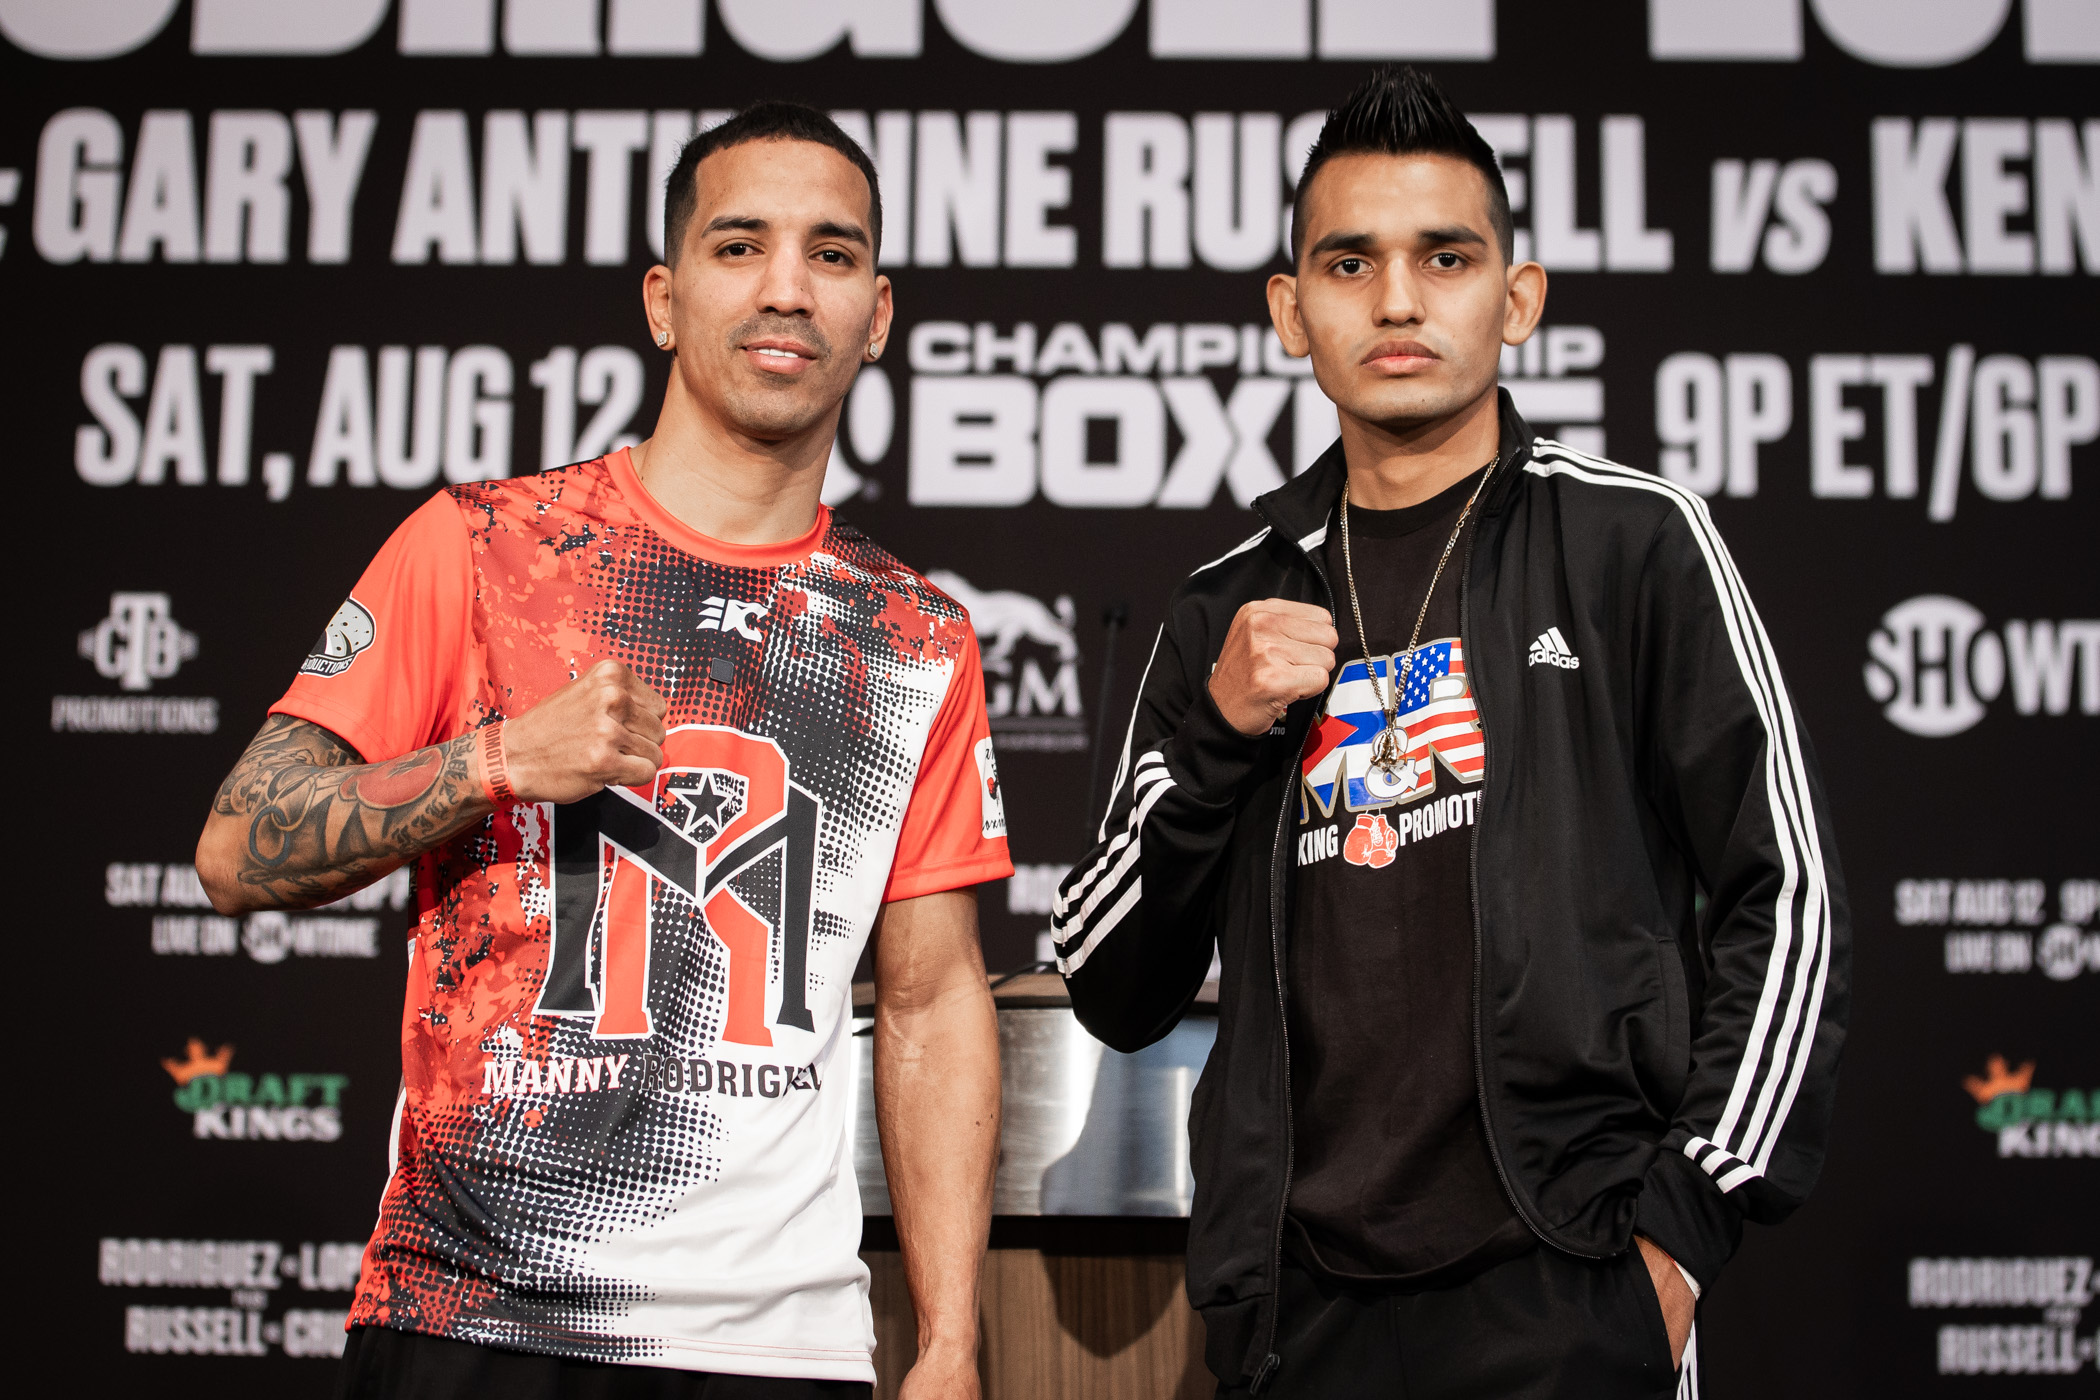 Rodriguez regains bantamweight title; early KOs for Russell and Maestre